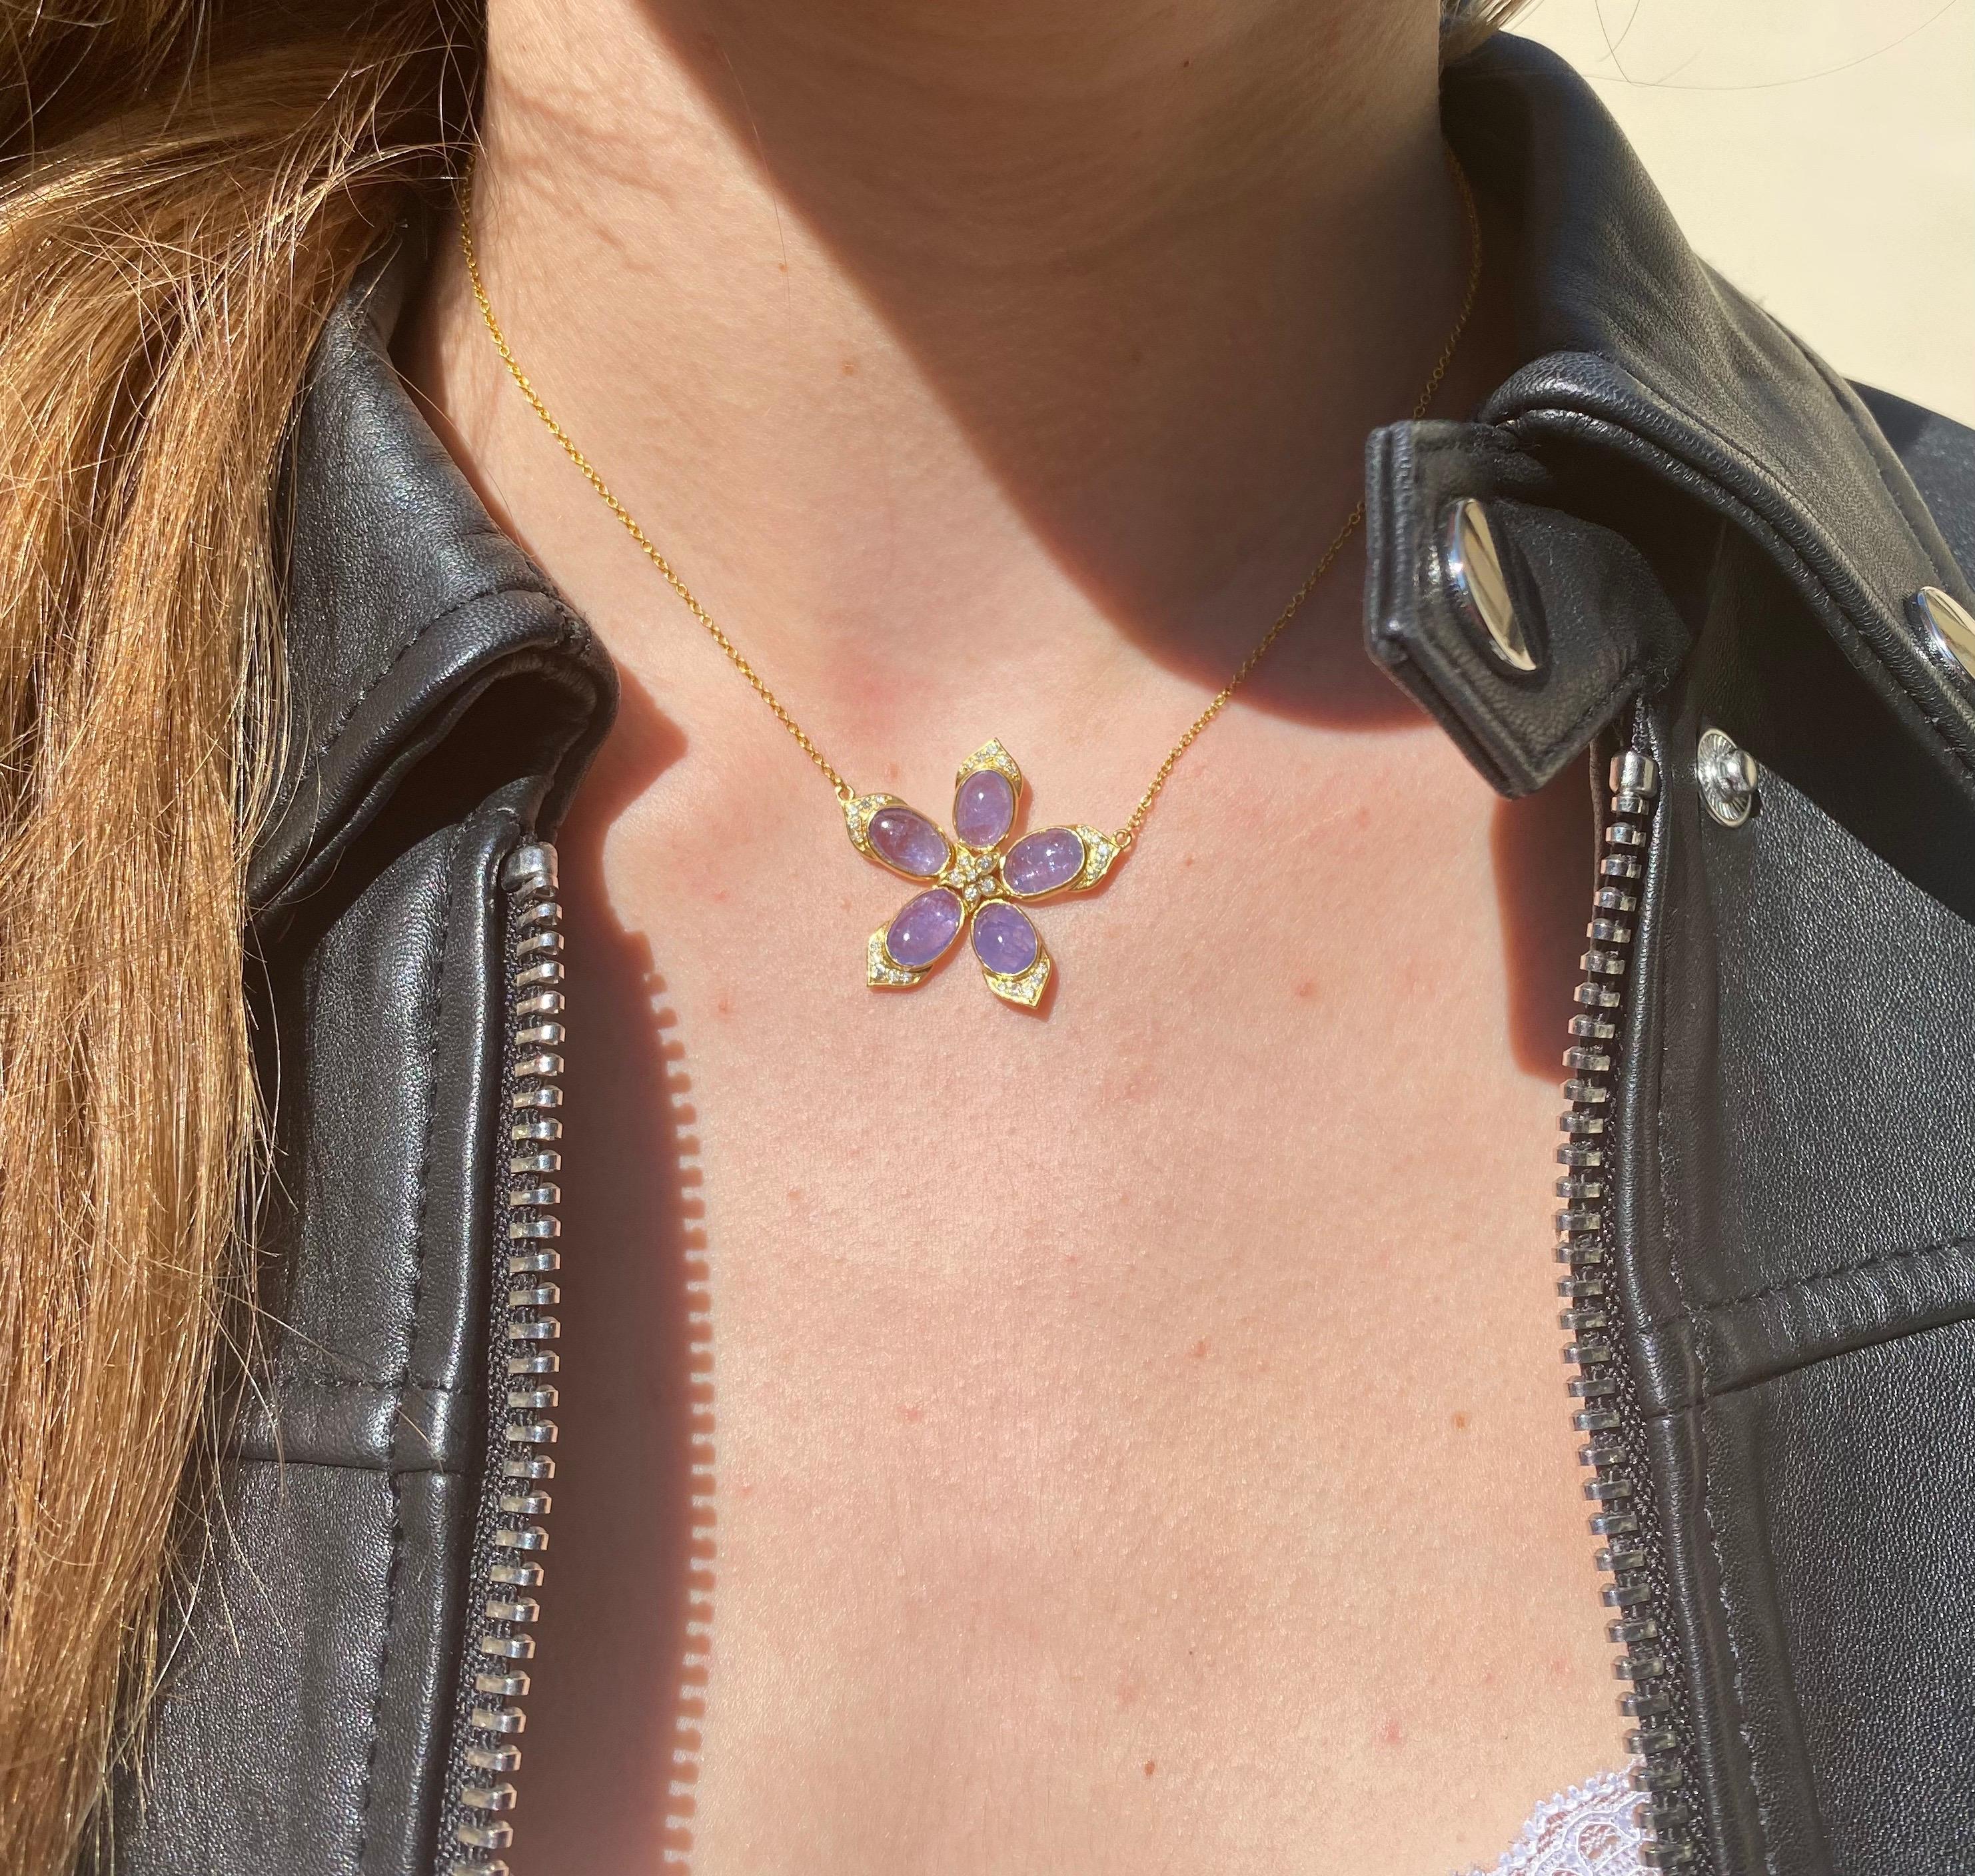 7.05cts Tanzanite, Diamond and Gold Flower Necklace by Lauren Harper For Sale 4